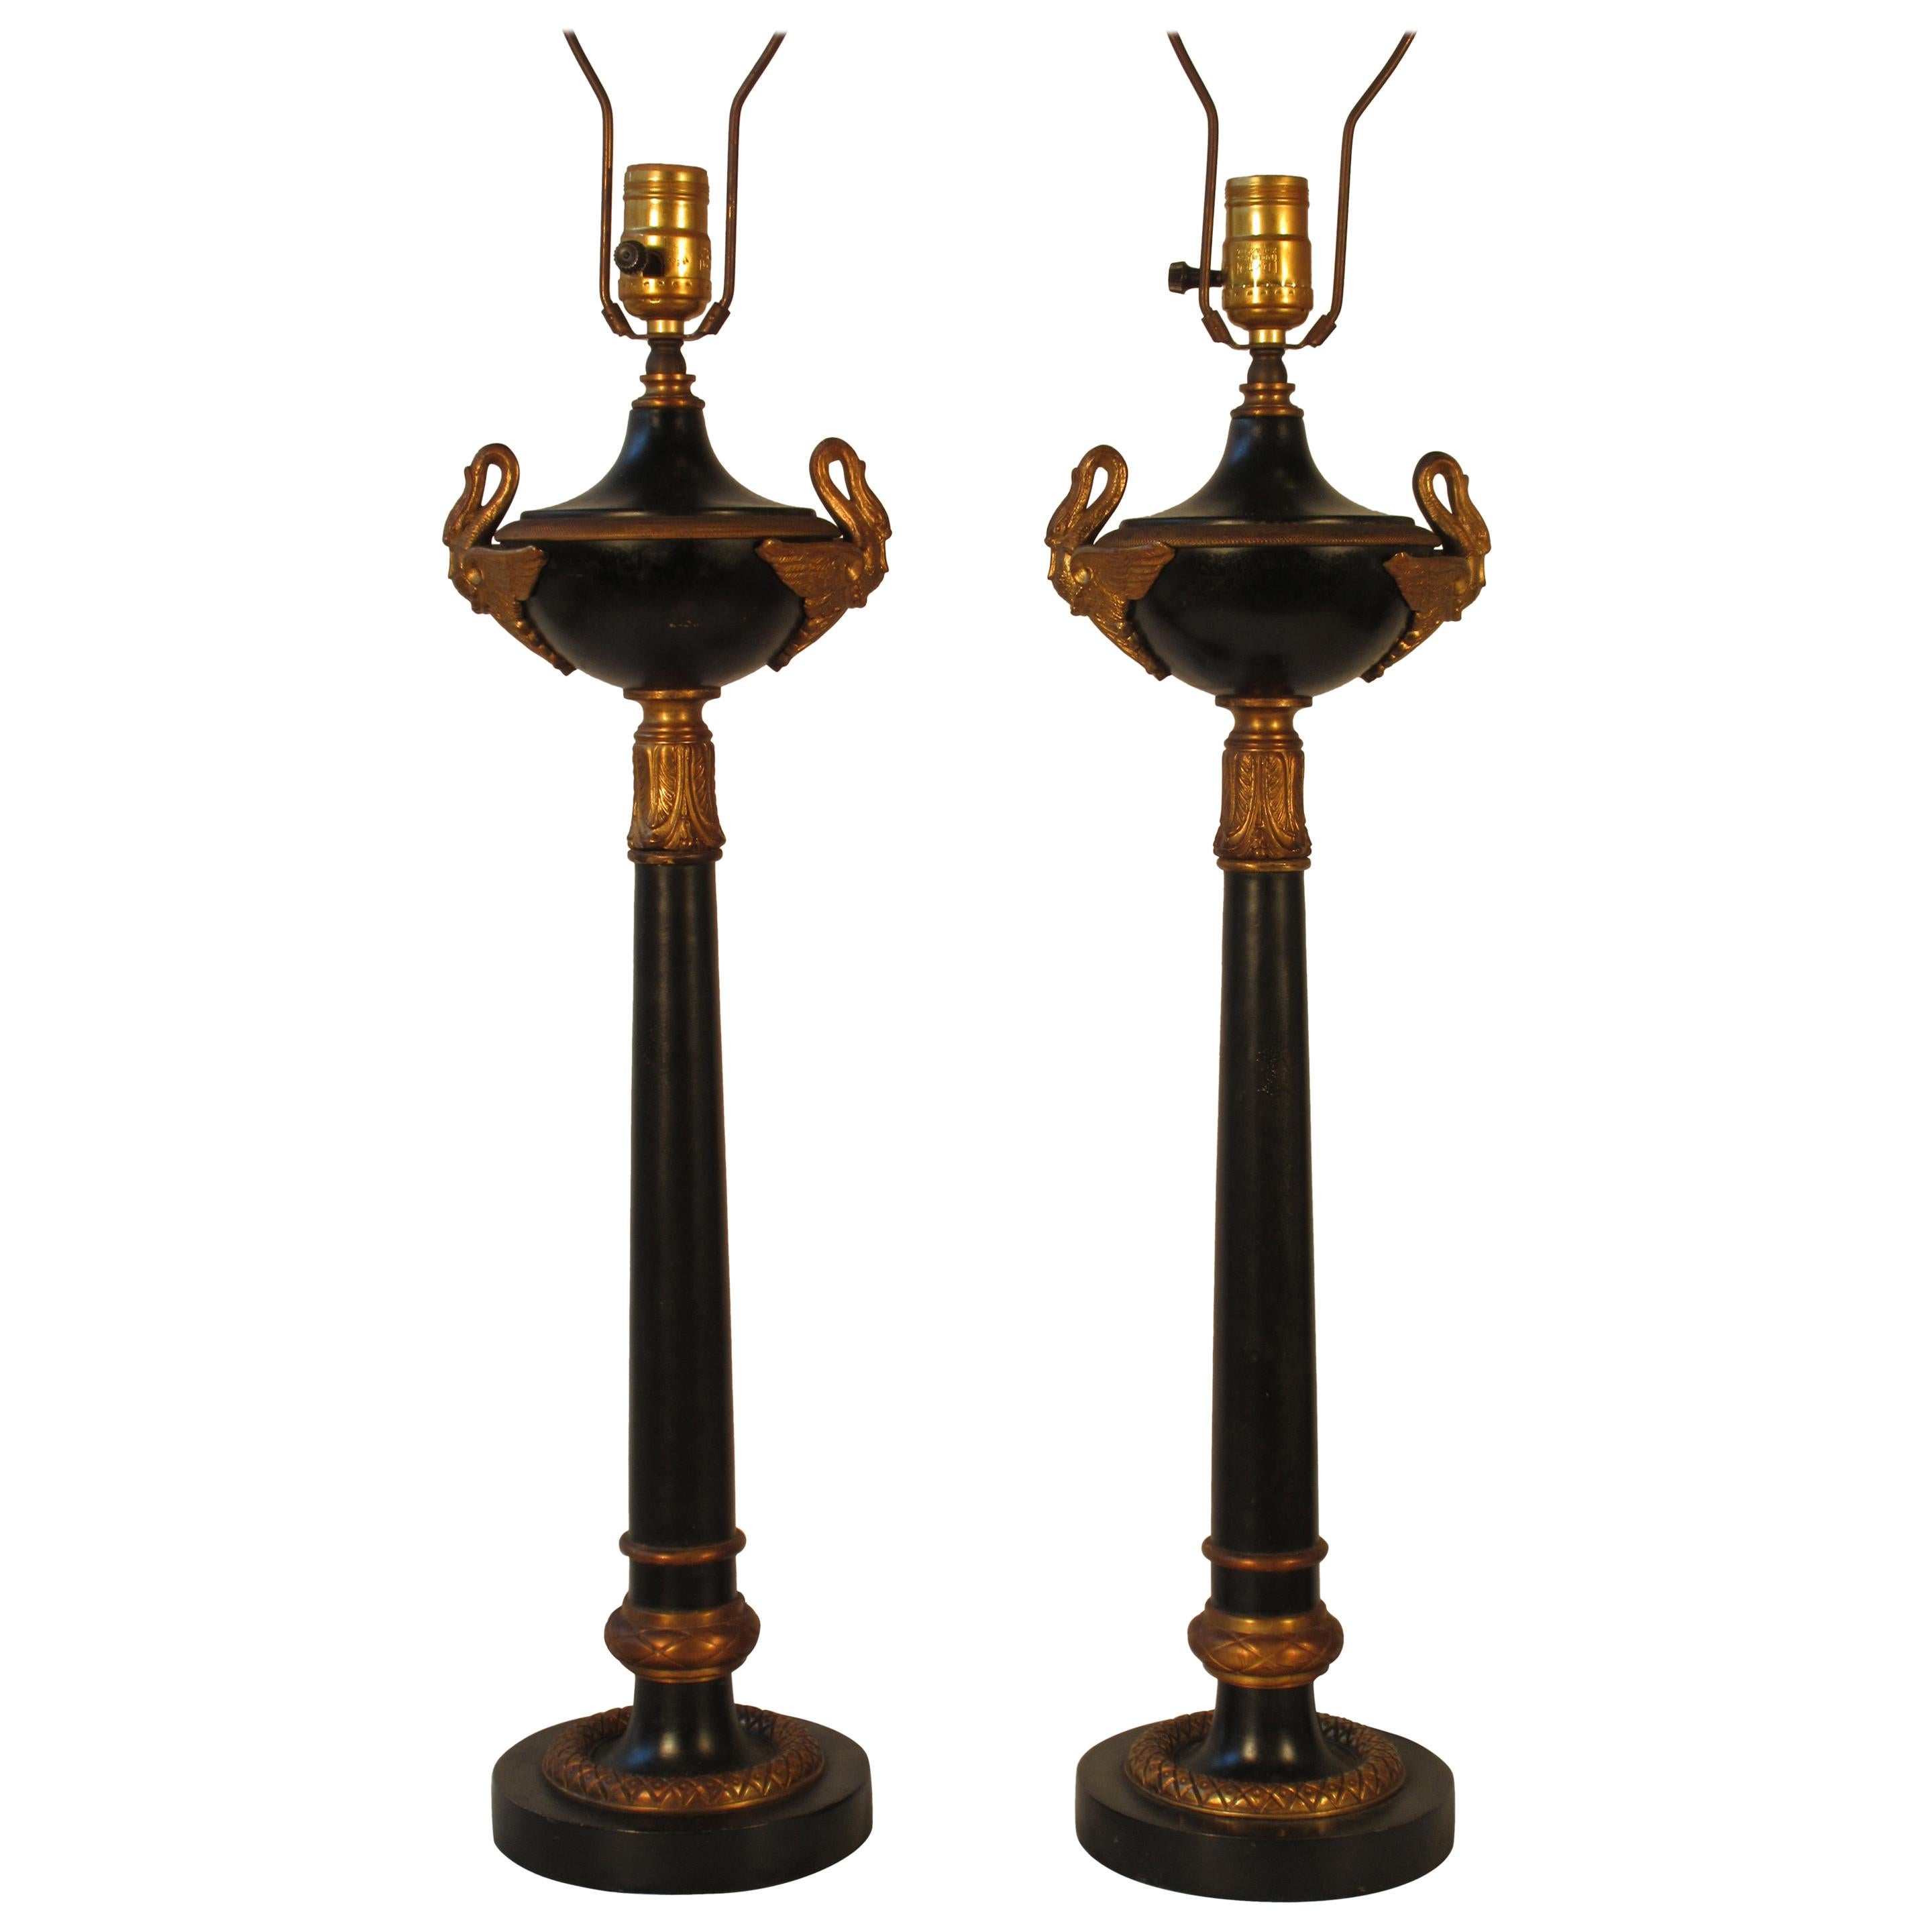 Pair of 1950s Tole Lamps with Brass Accents